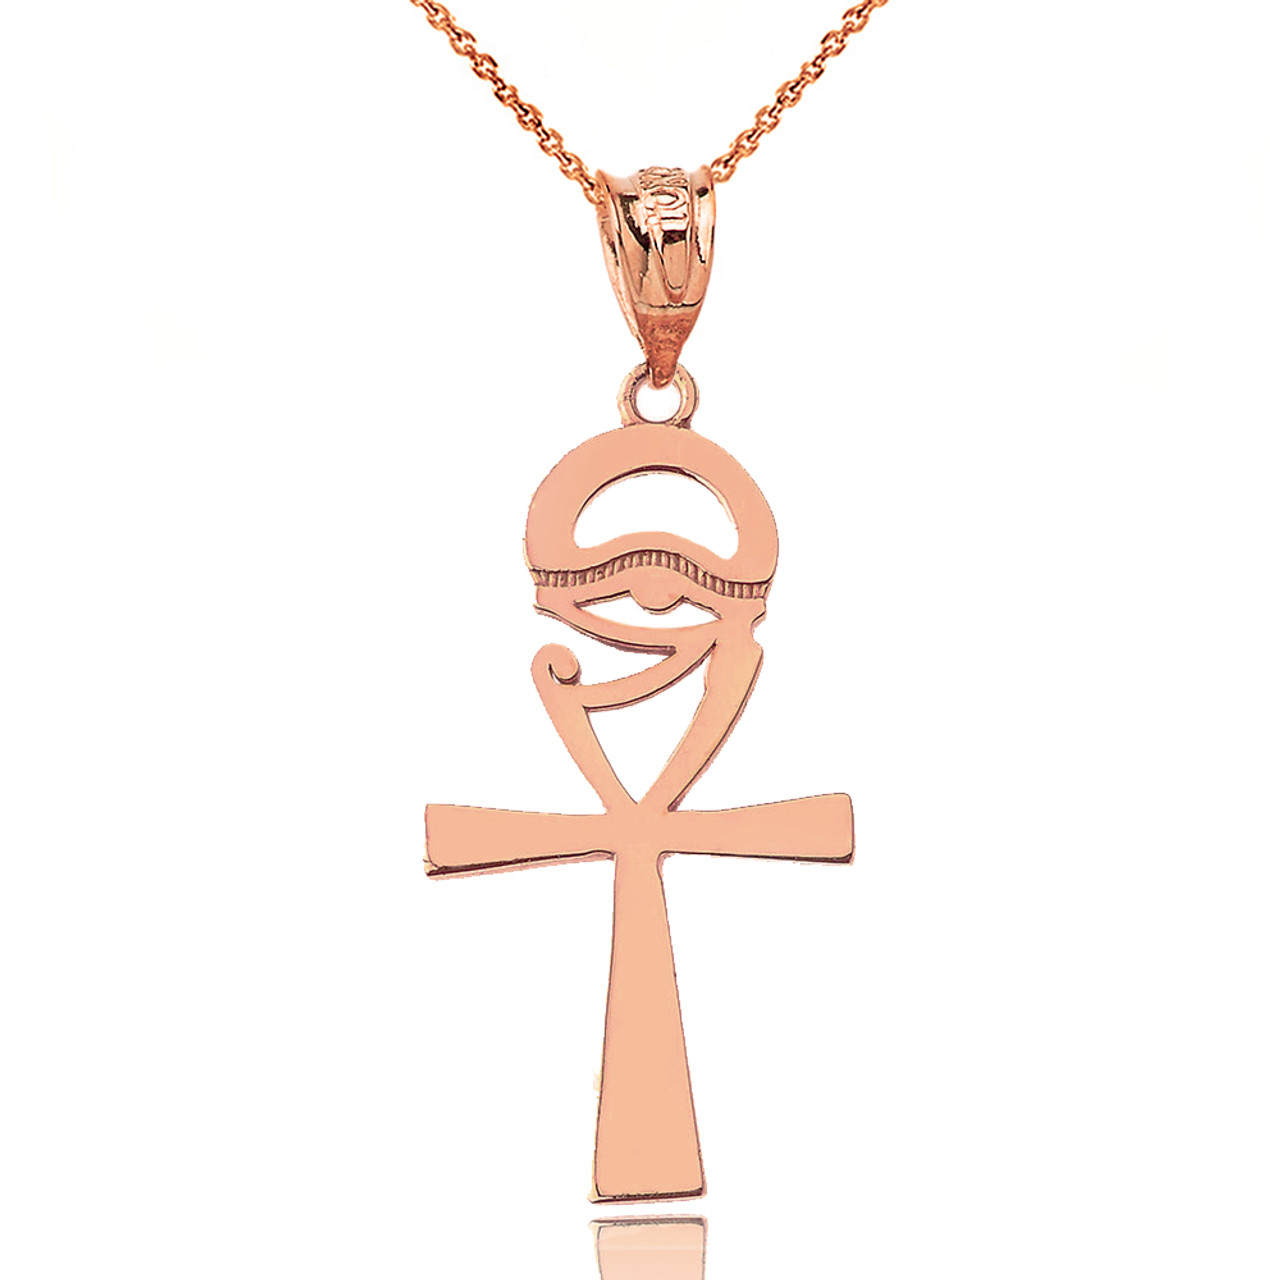 ANKH WITH EYE OF HORUS PENDANT NECKLACE IN ROSE GOLD Gold Purity